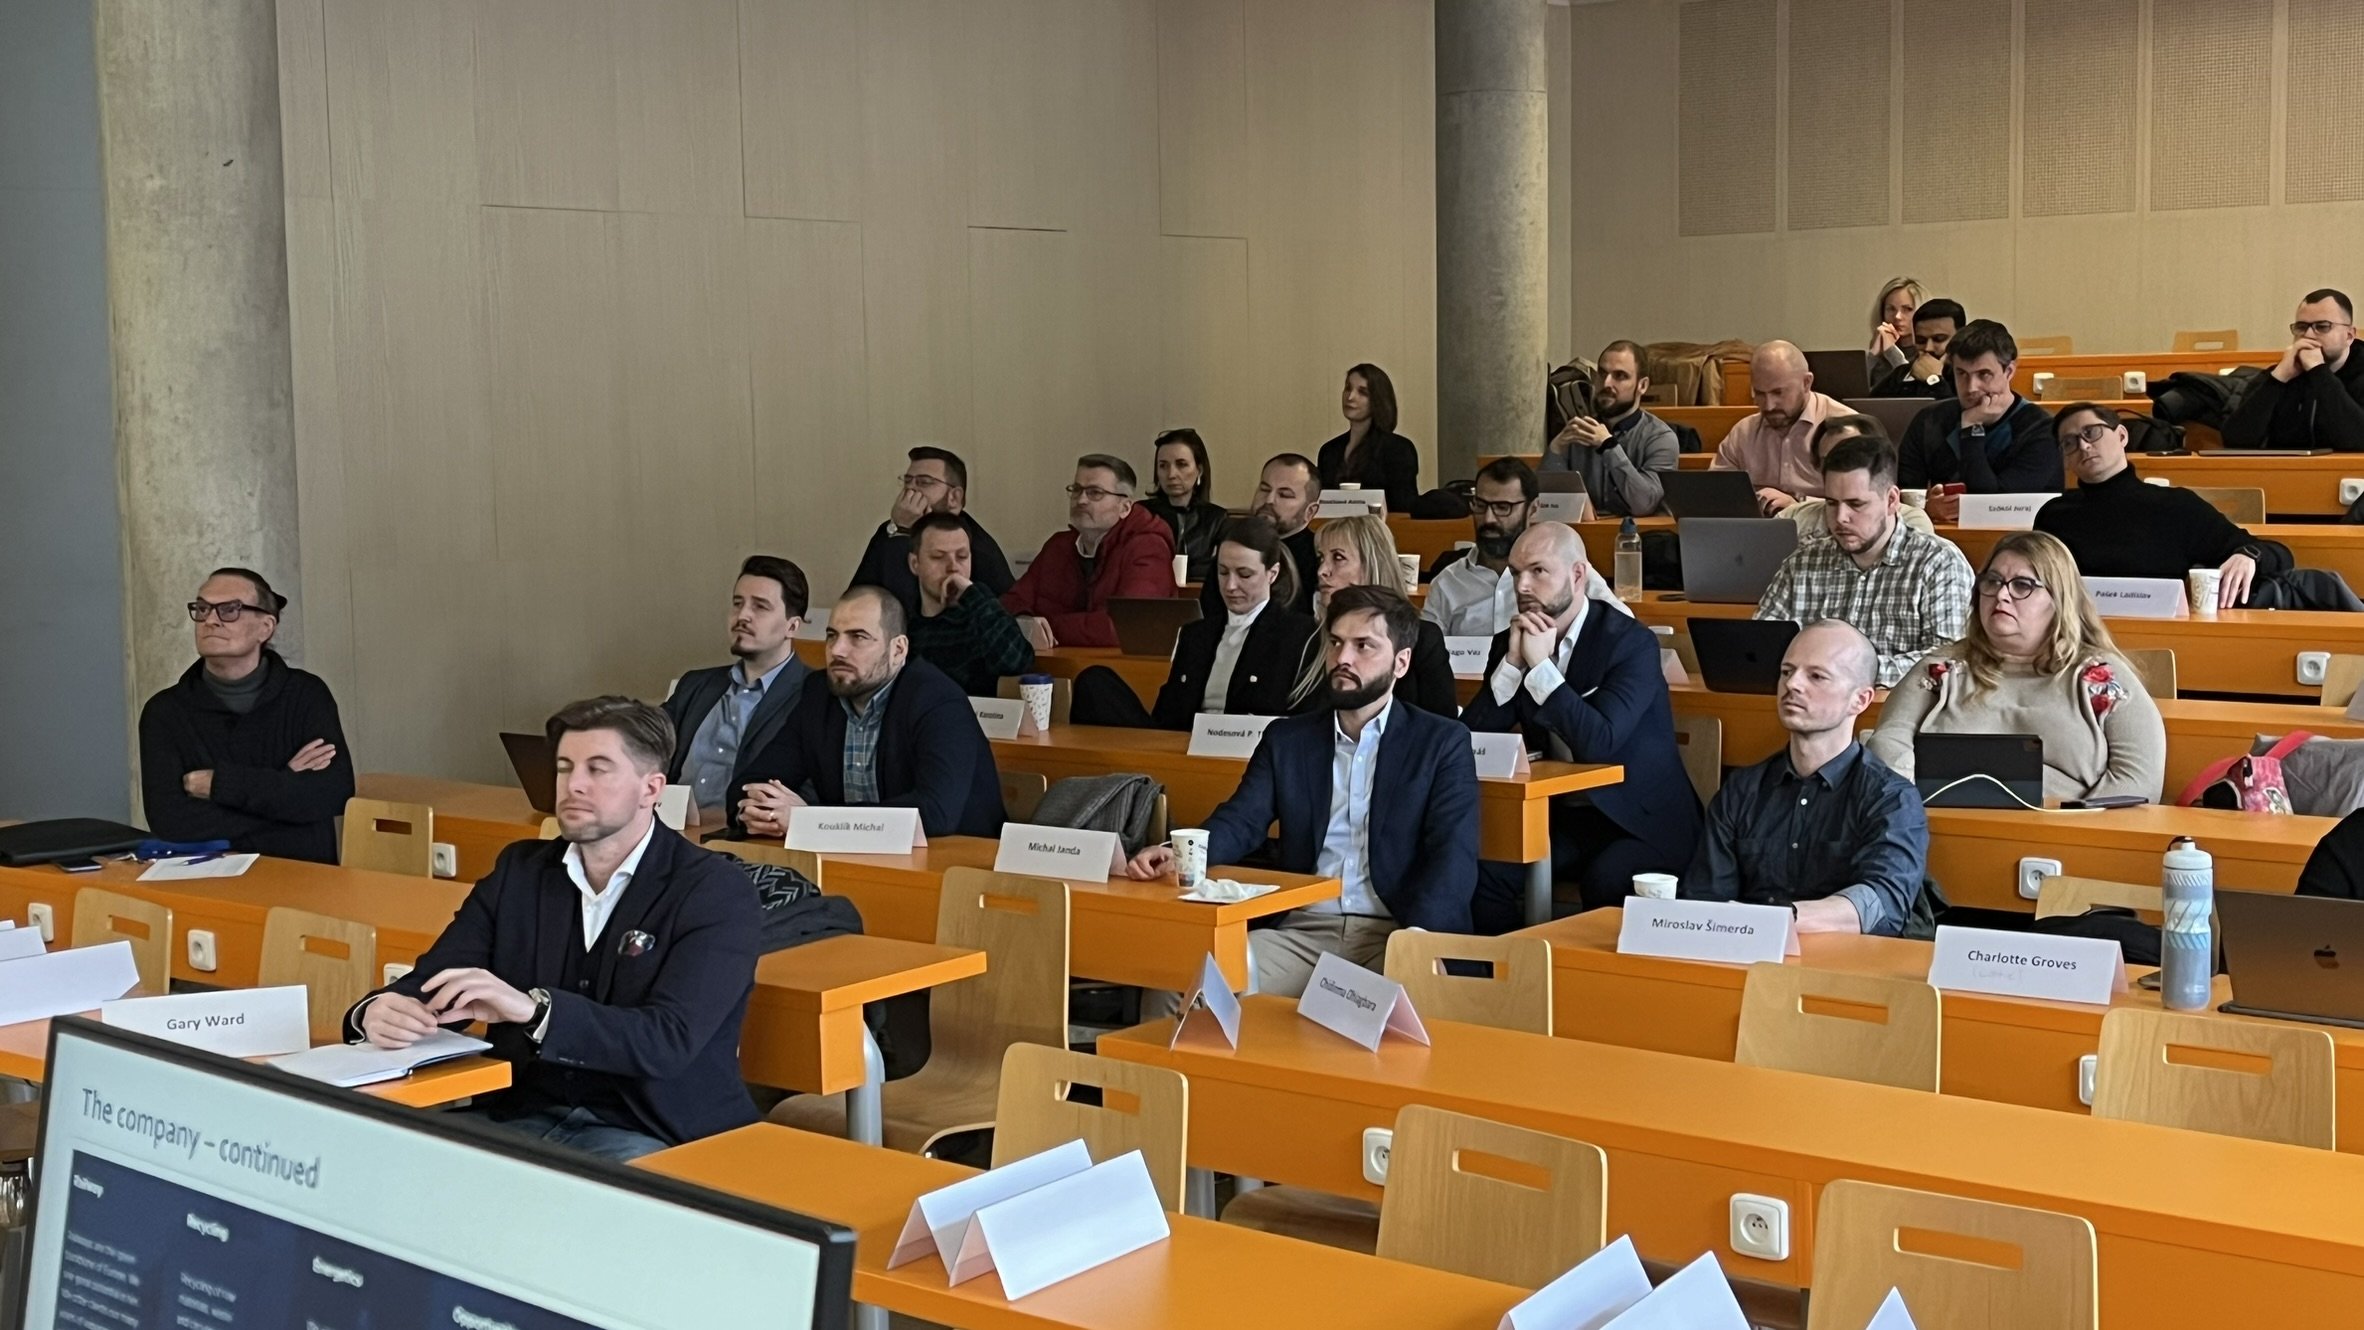 Corporate workshop with MBA students of the Faculty of Business Administration, Prague University of Economics and Business